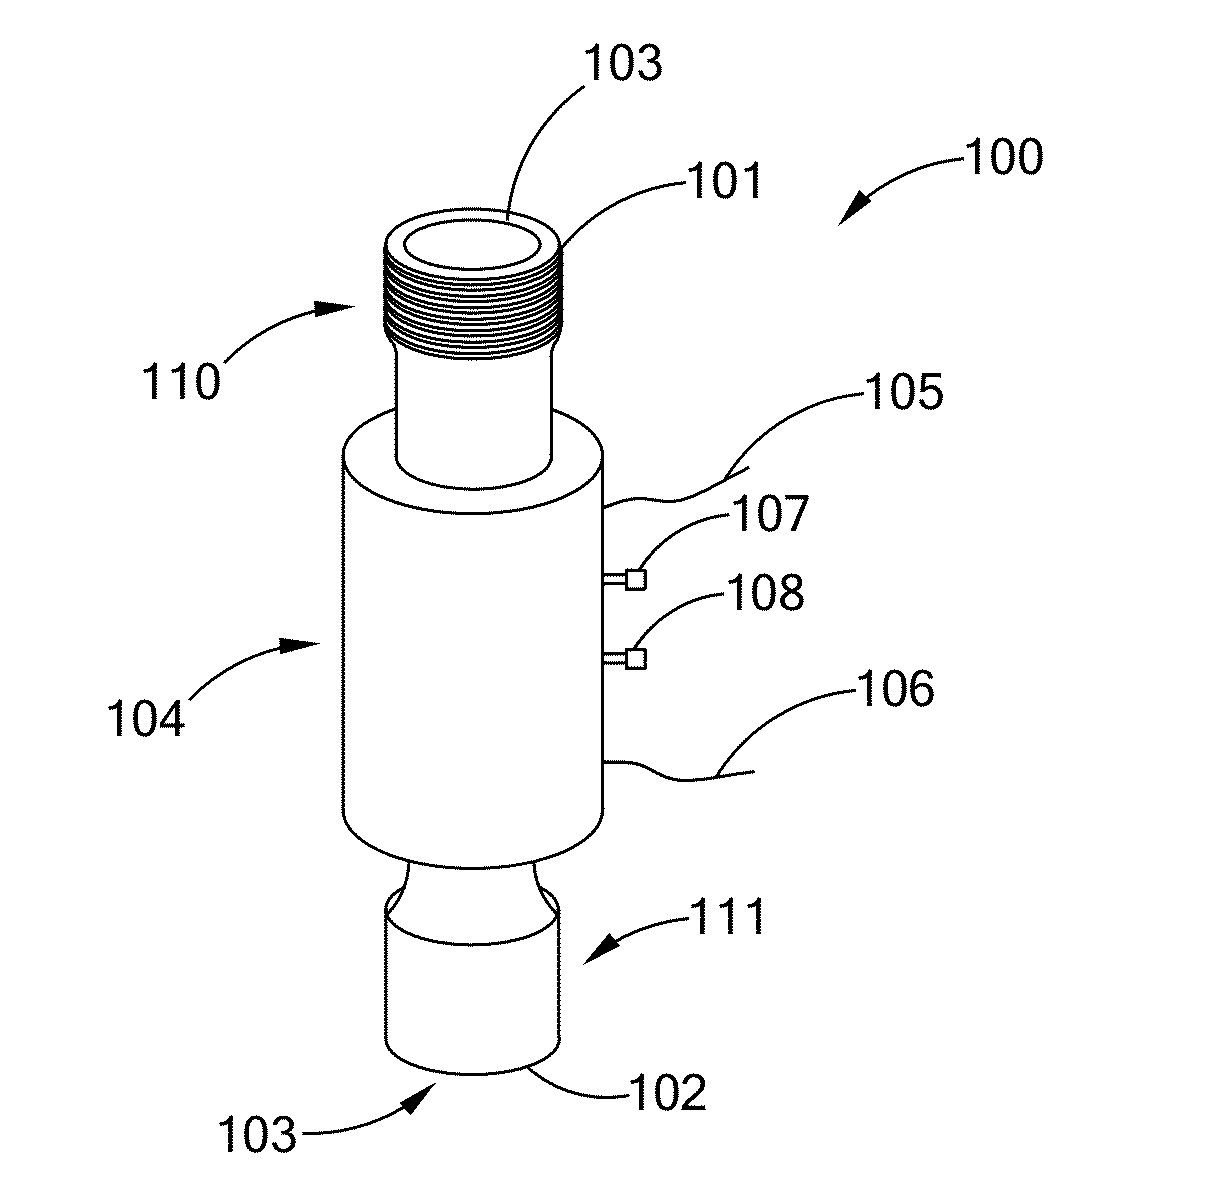 Light weight high power laser presure control systems and methods of use